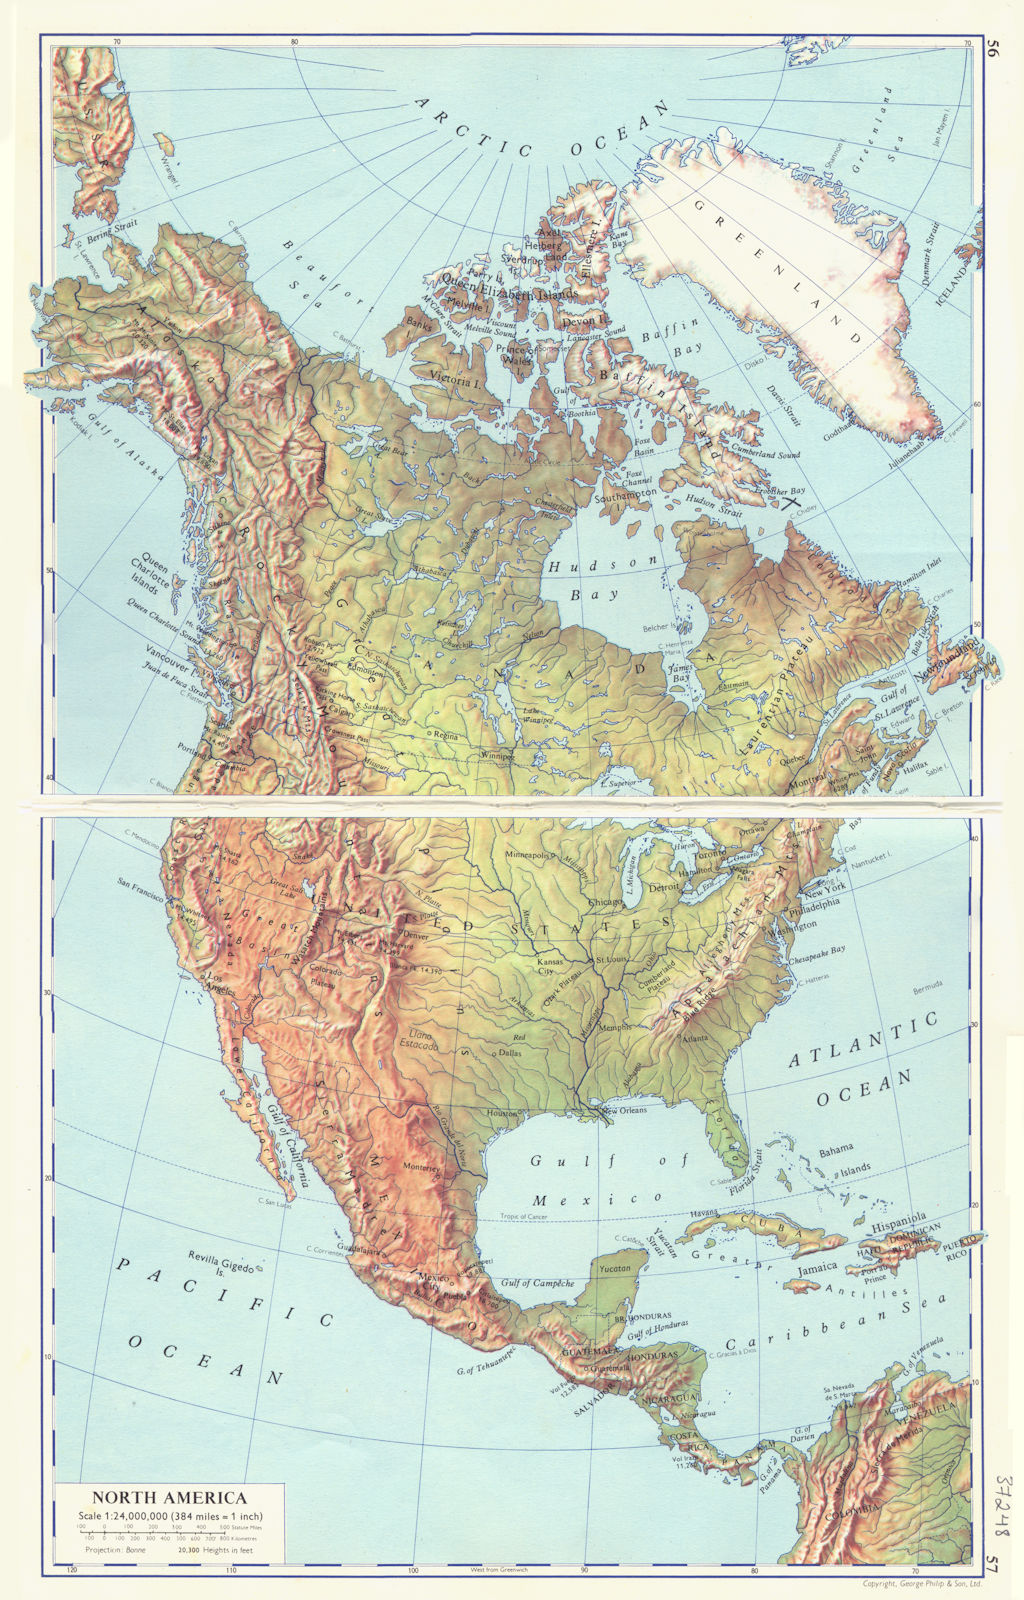 NORTH AMERICA. North America physical 1962 old vintage map plan chart